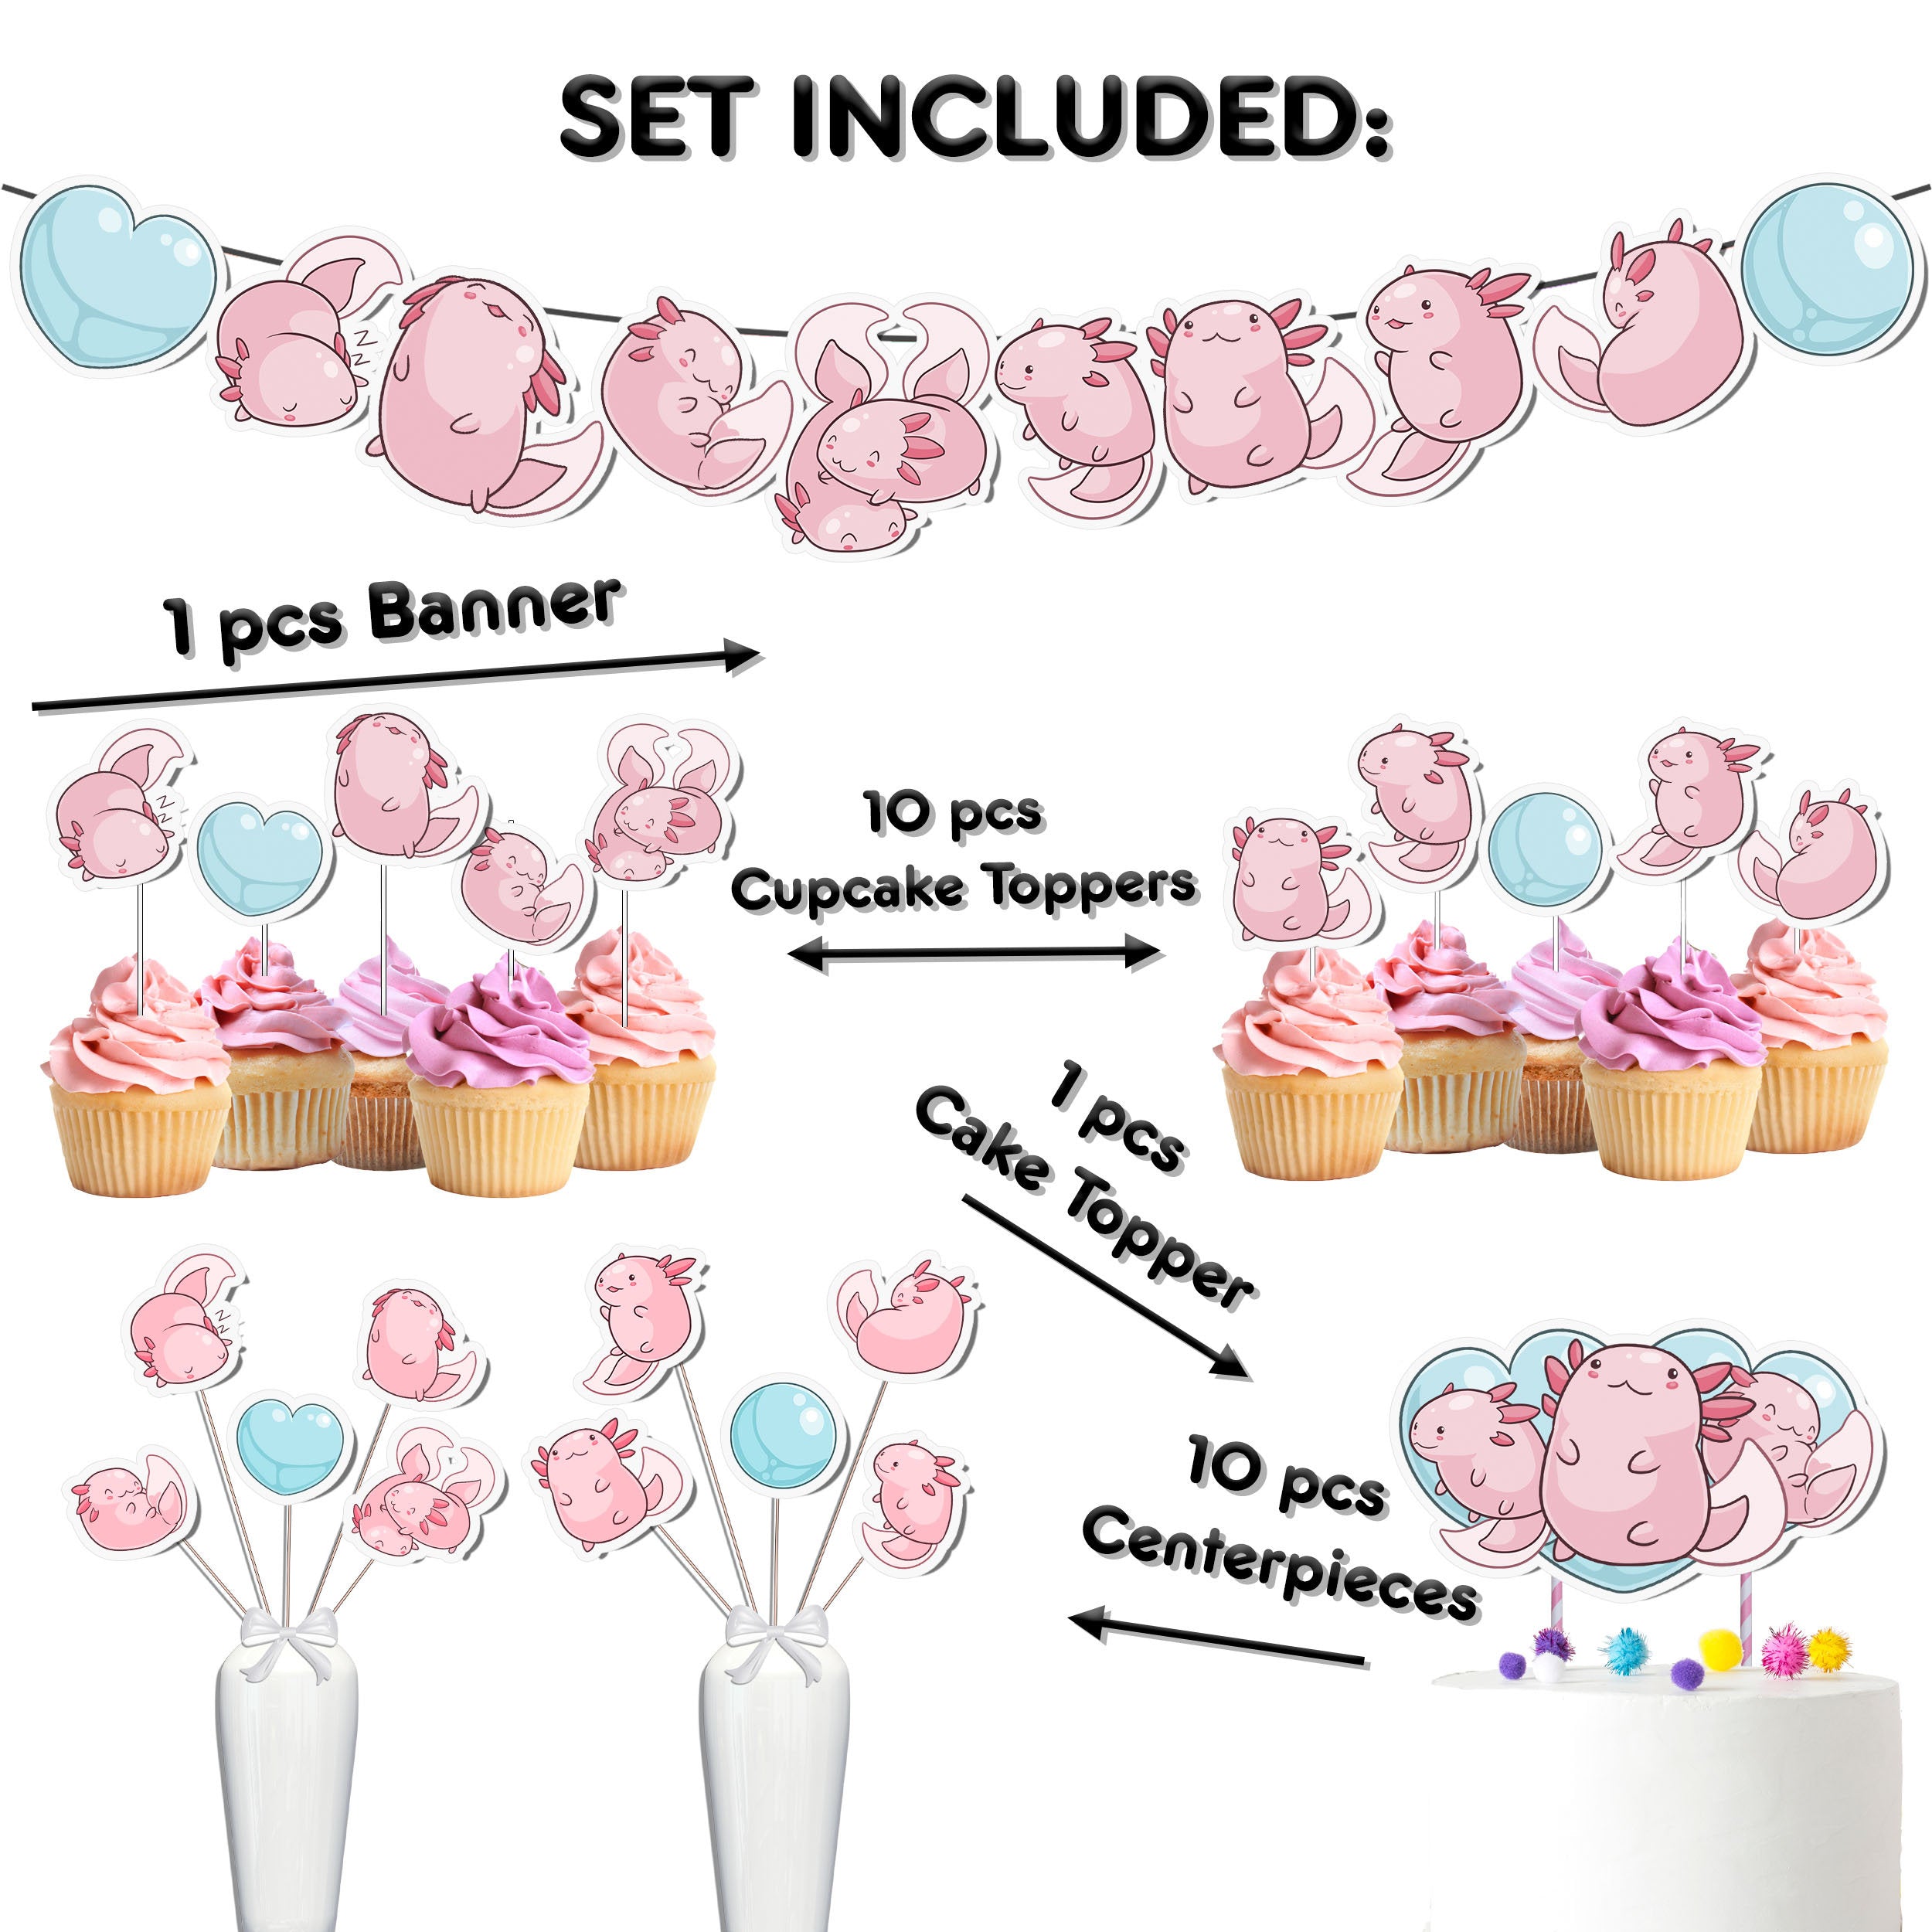 Cute Axolotl Baby Shower & Birthday Party Decor Set - Banner, Cake & Cupcake Toppers, Centerpieces